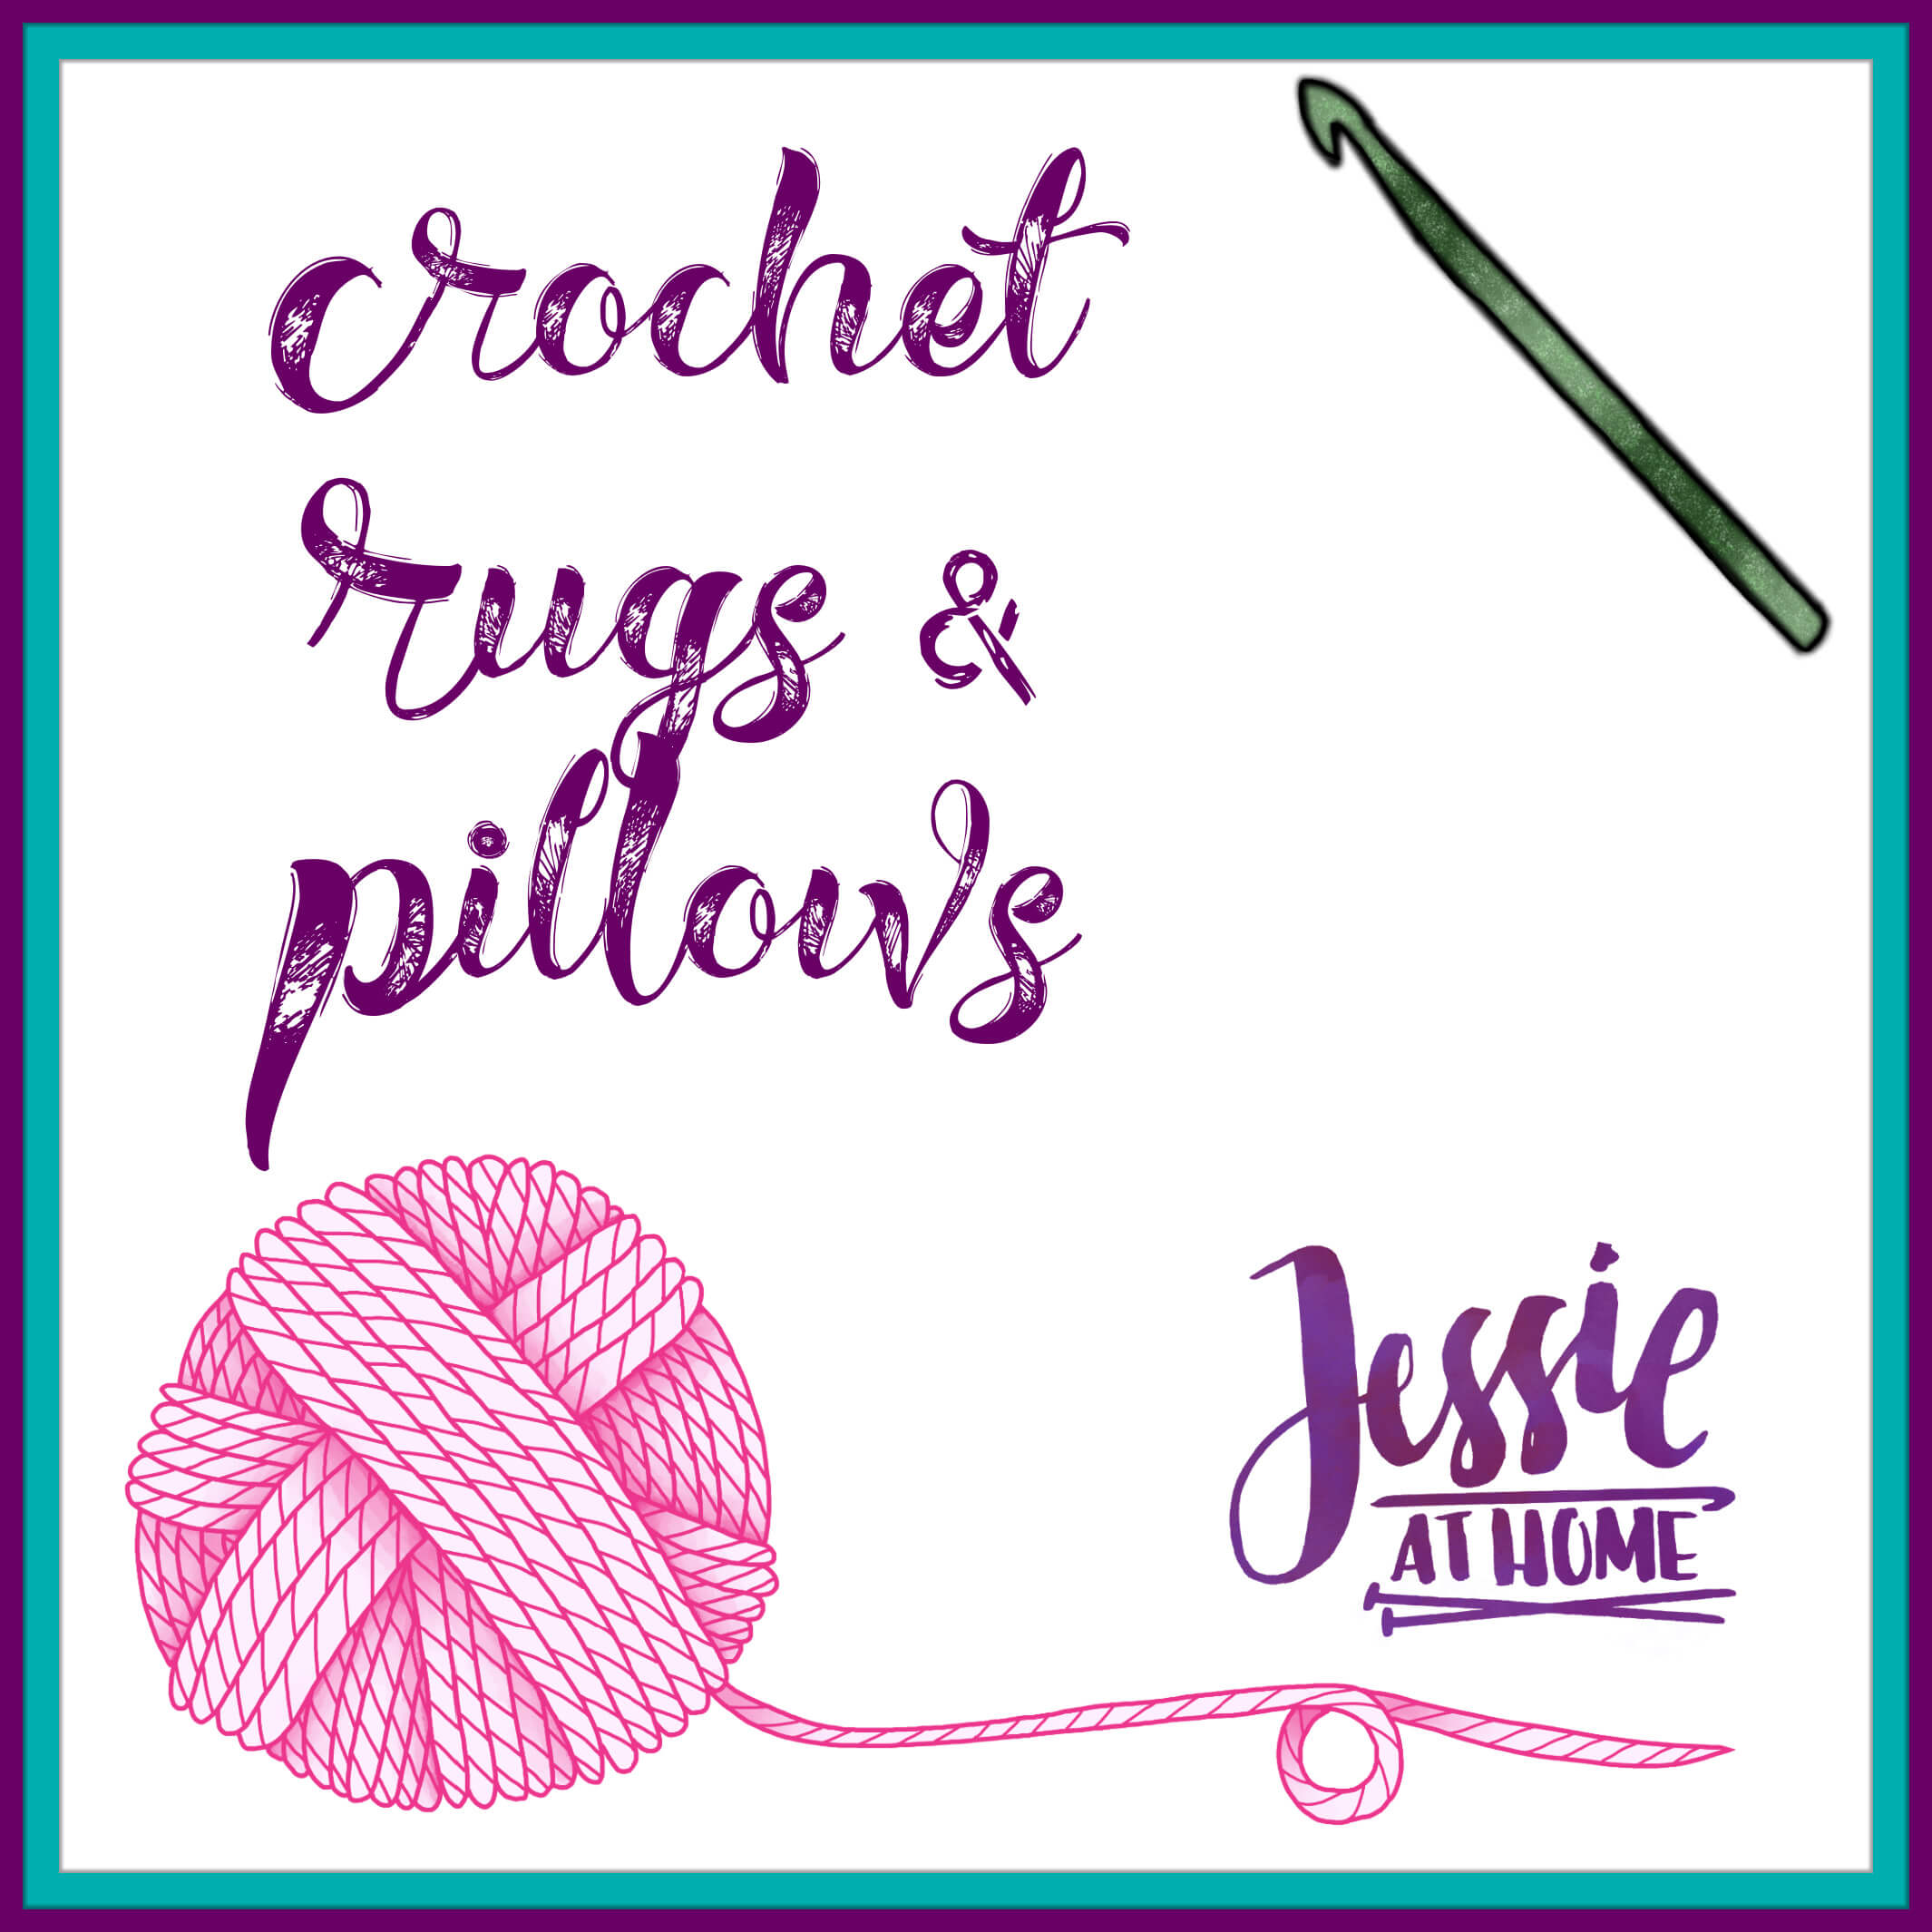 Crochet Rugs & Pillows Menu on Jessie At Home